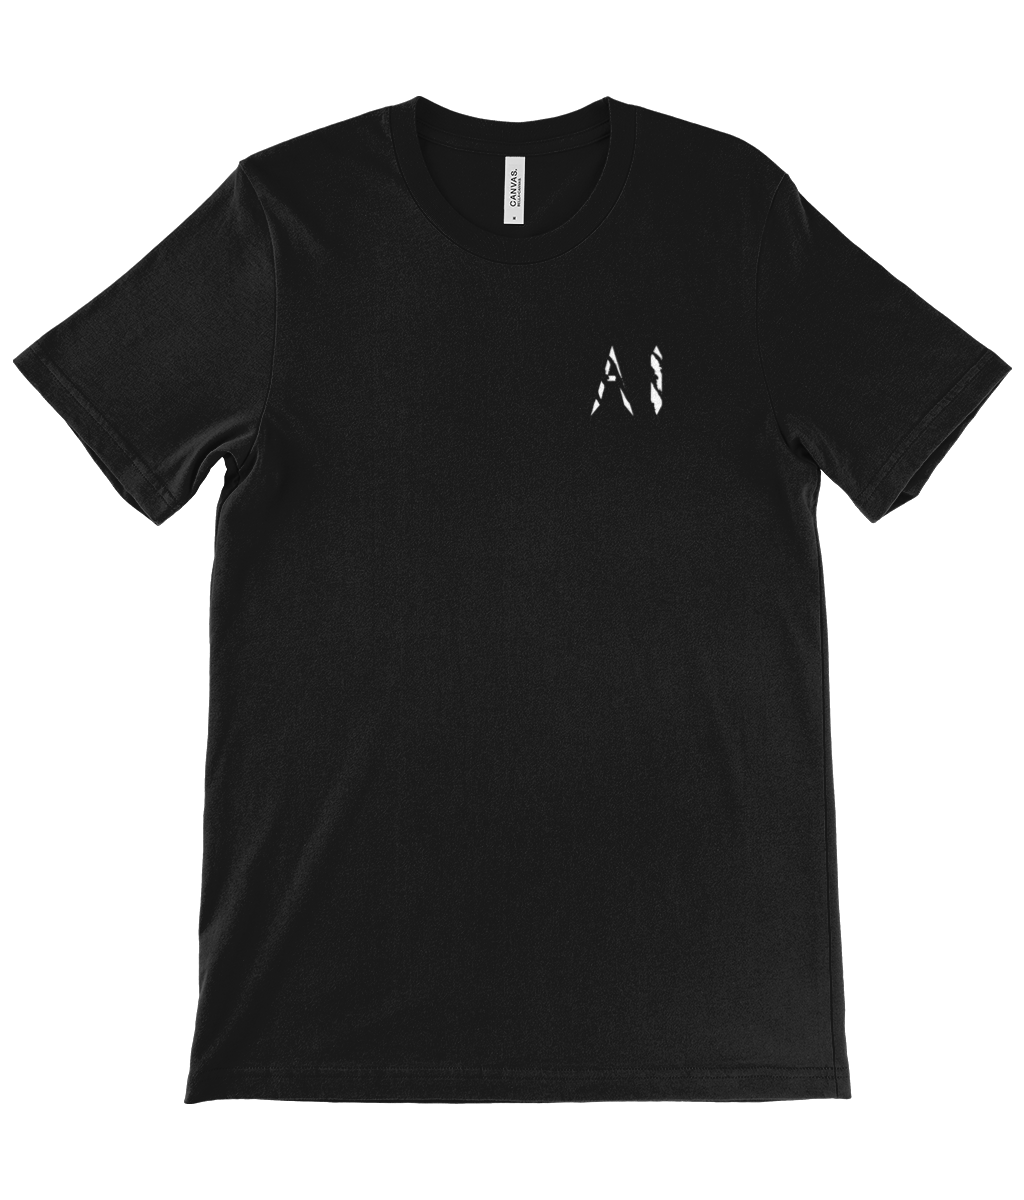 Mens black Casual T-Shirt with white logo on the left chest